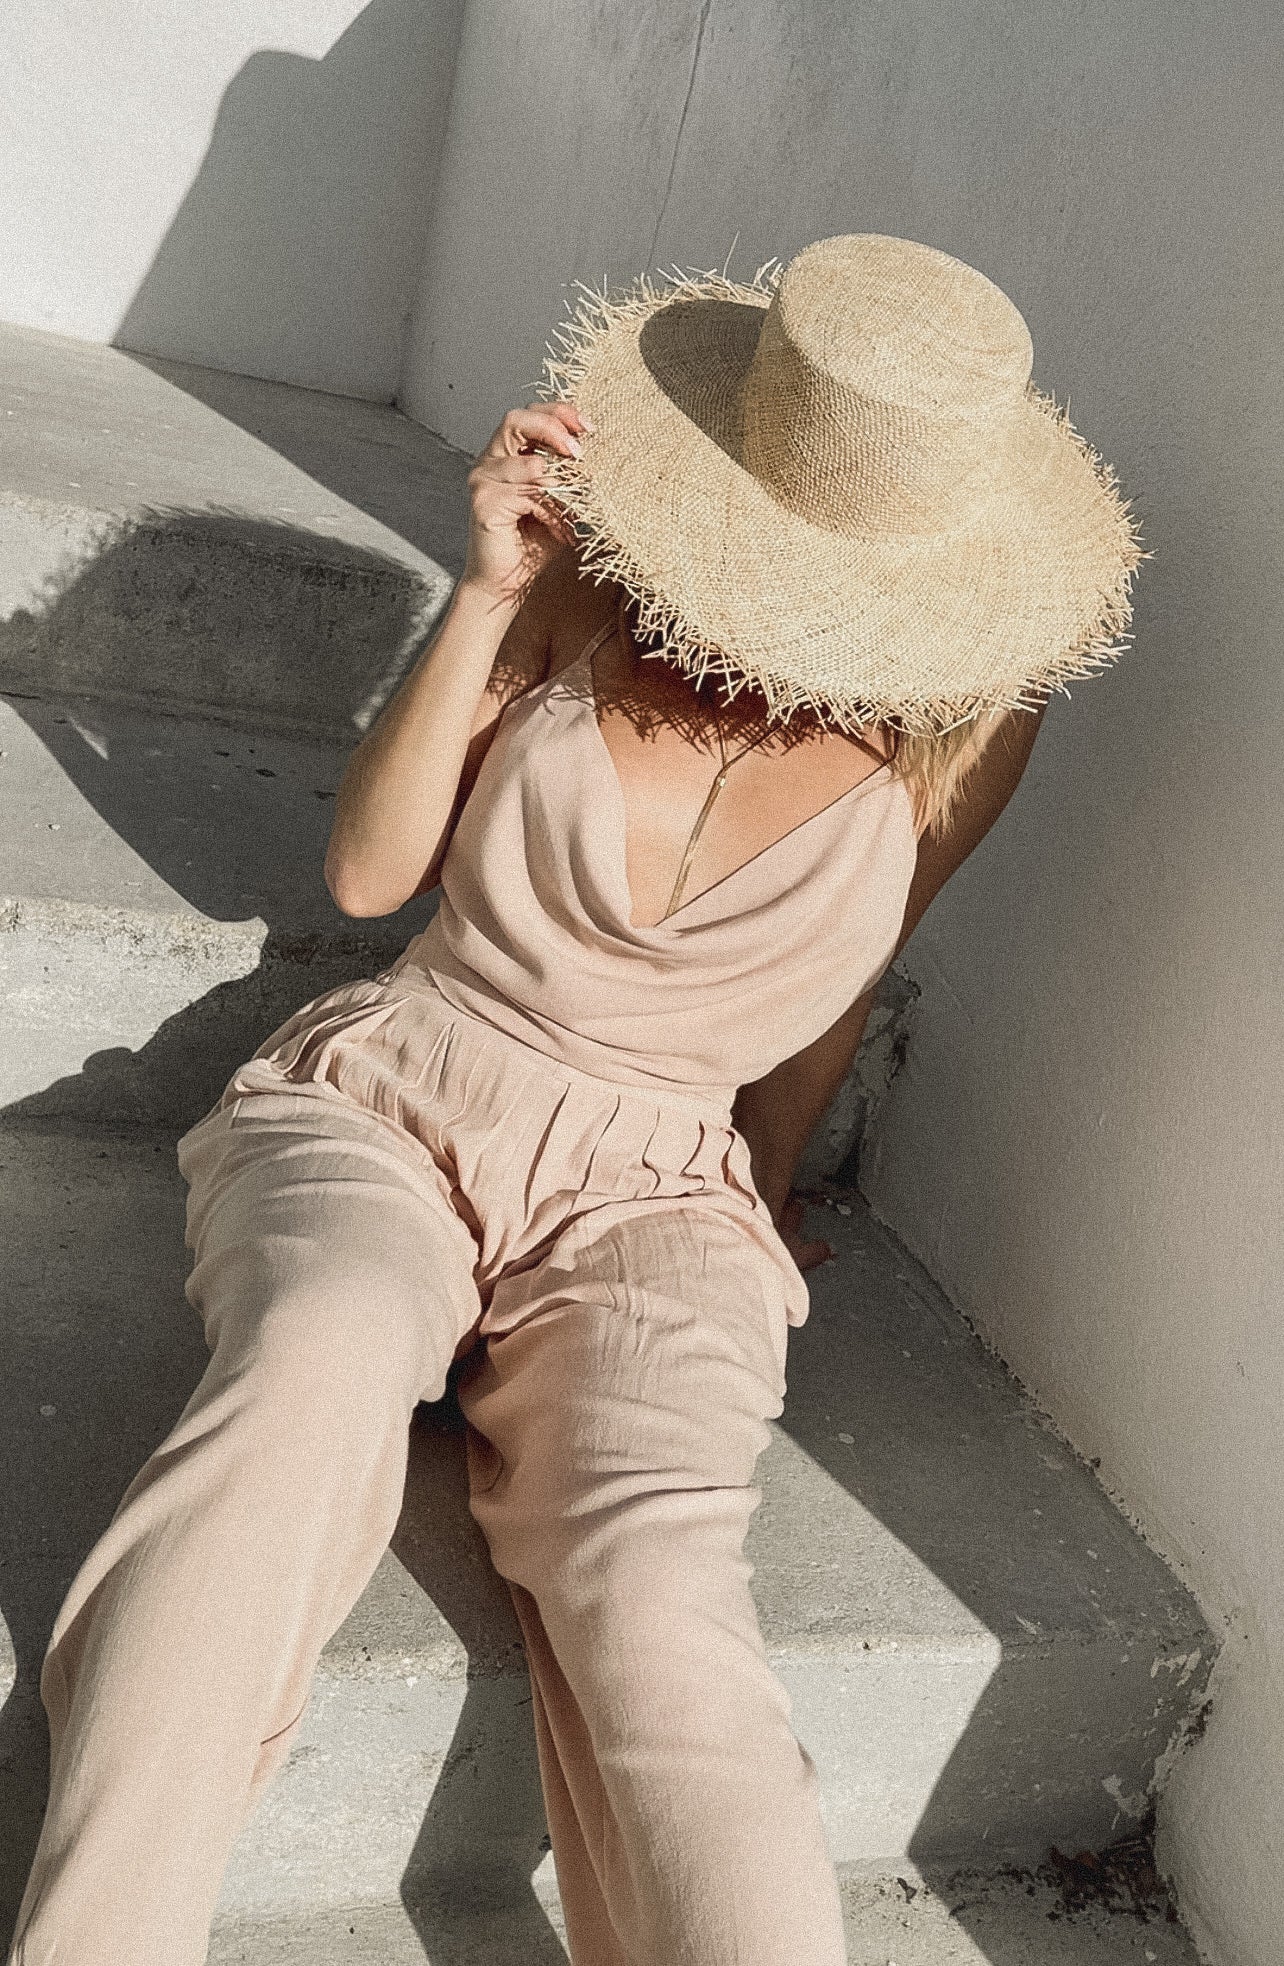 The Cherie Cowl Neckline Pant Set in Beige / Carnation sold at Scarlette The Label, an online fashion boutique for women. Resort Wear Collection SS 2021